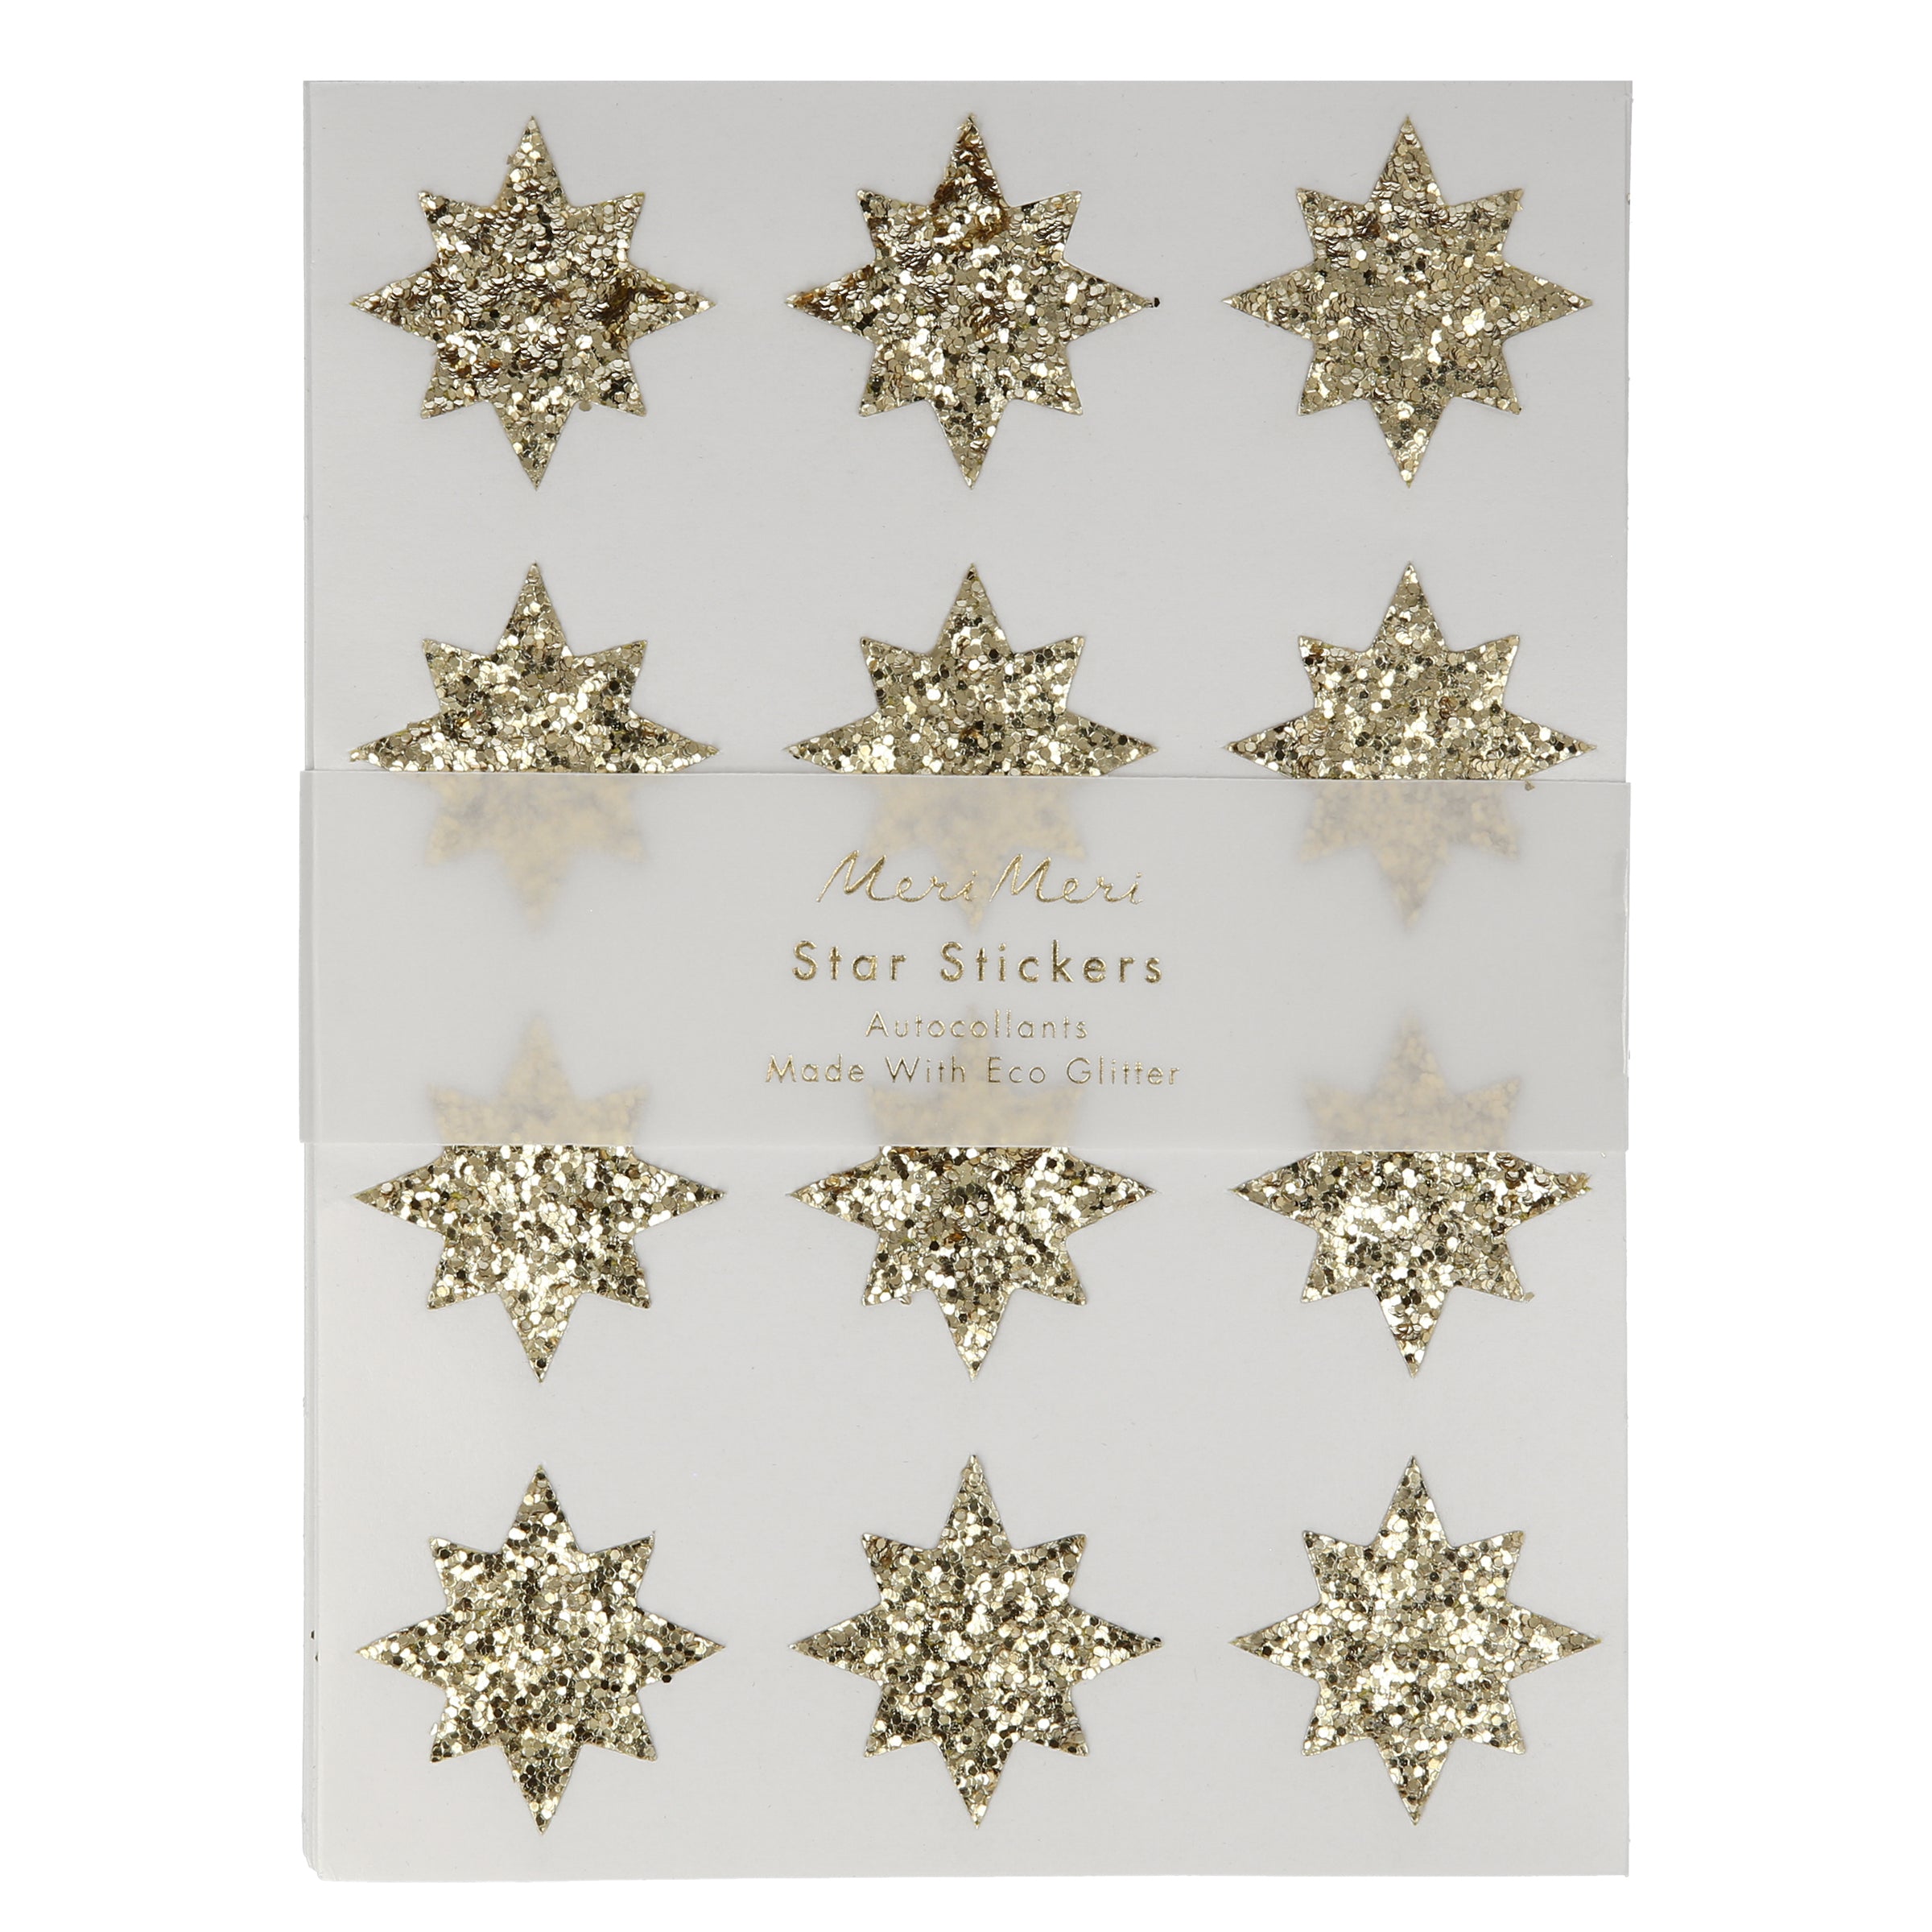 These fabulous glitter stickers, crafted with ECO platinum gold glitter, are in the shape of a eight point stylish star.